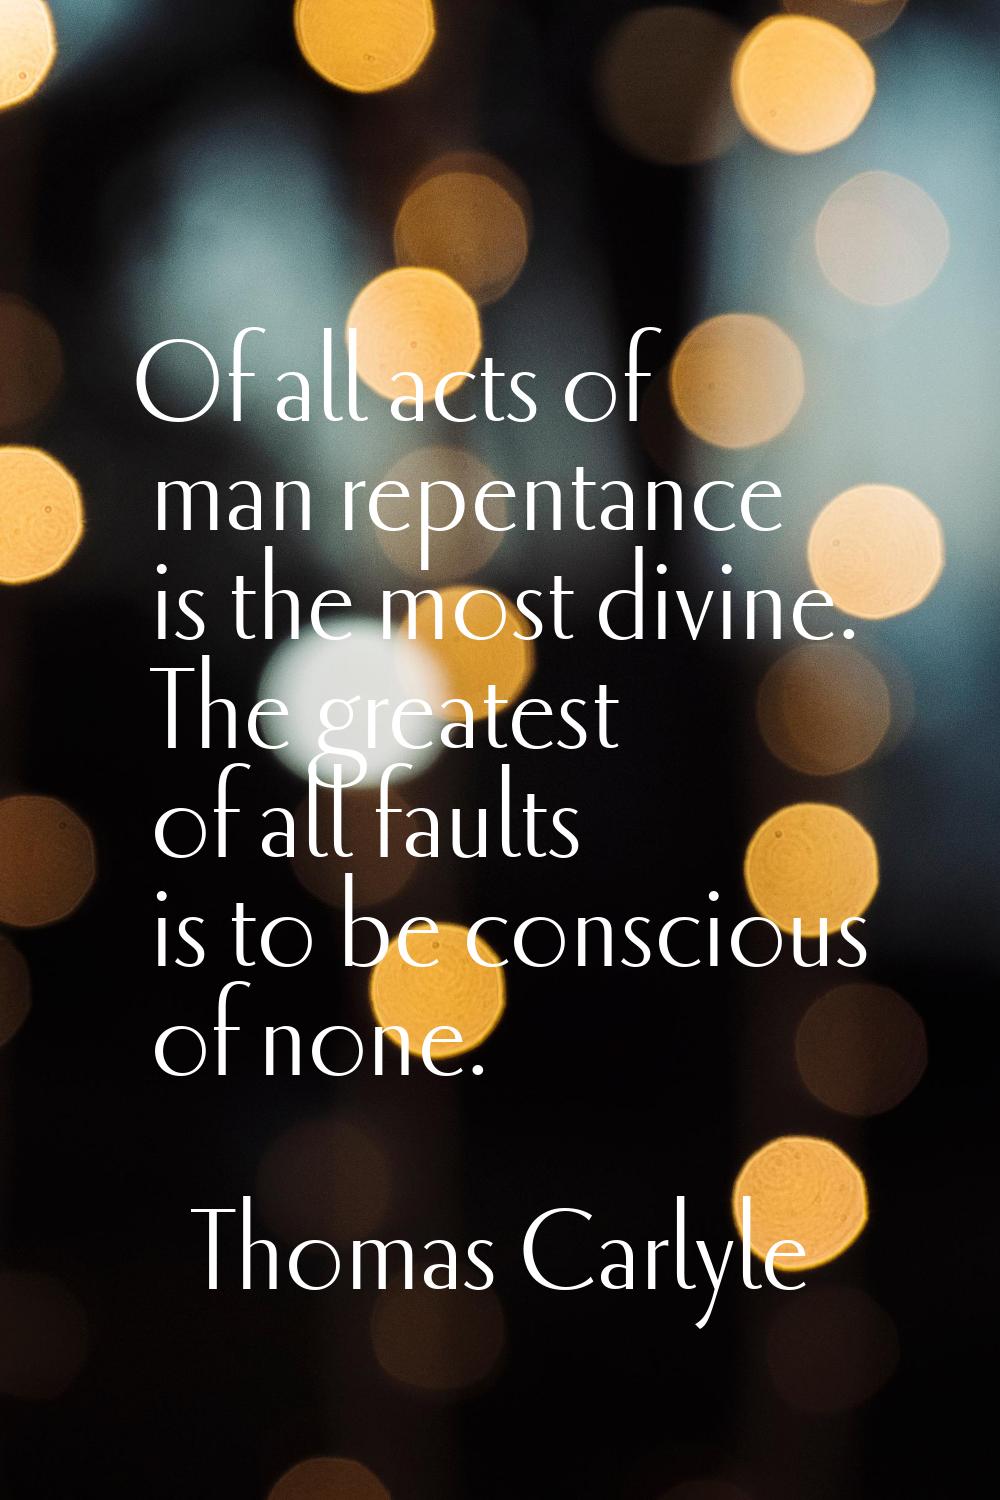 Of all acts of man repentance is the most divine. The greatest of all faults is to be conscious of 